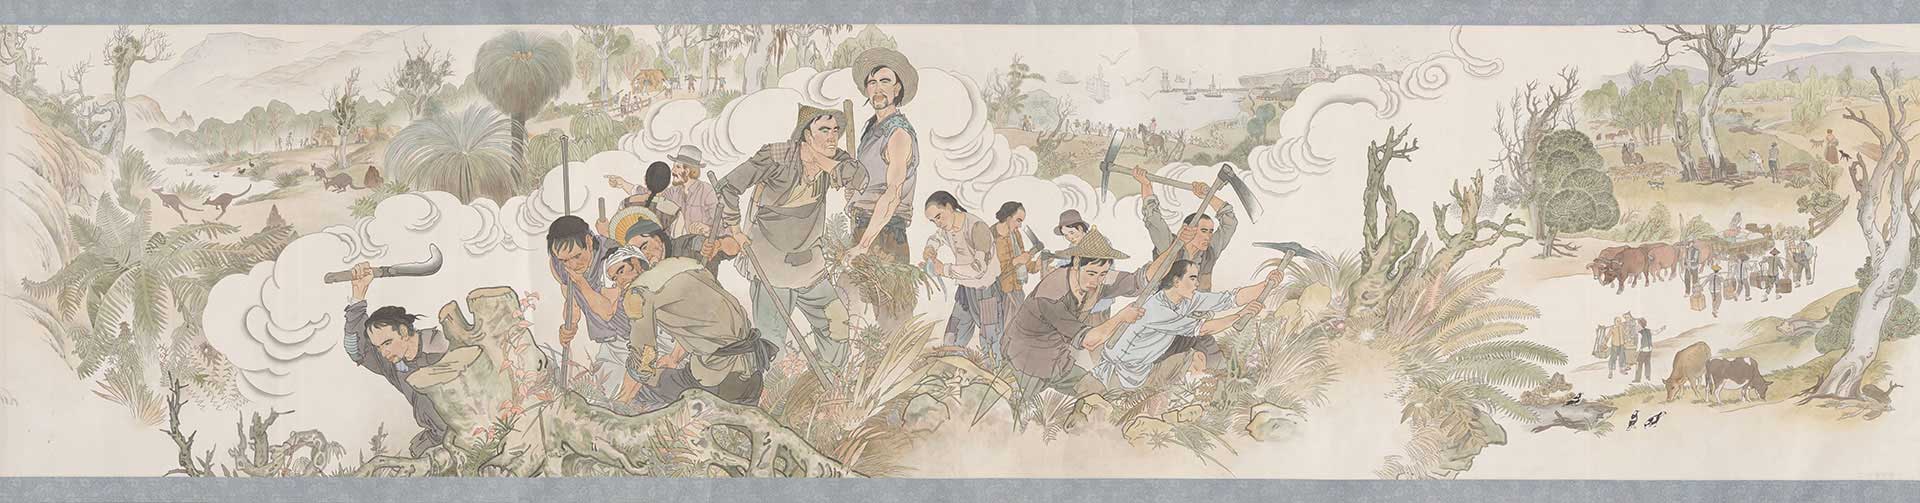 Stitched panels of the Harvest of Endurance scroll featuring ‘Before the gold rush’ and ‘Chinese workers’.